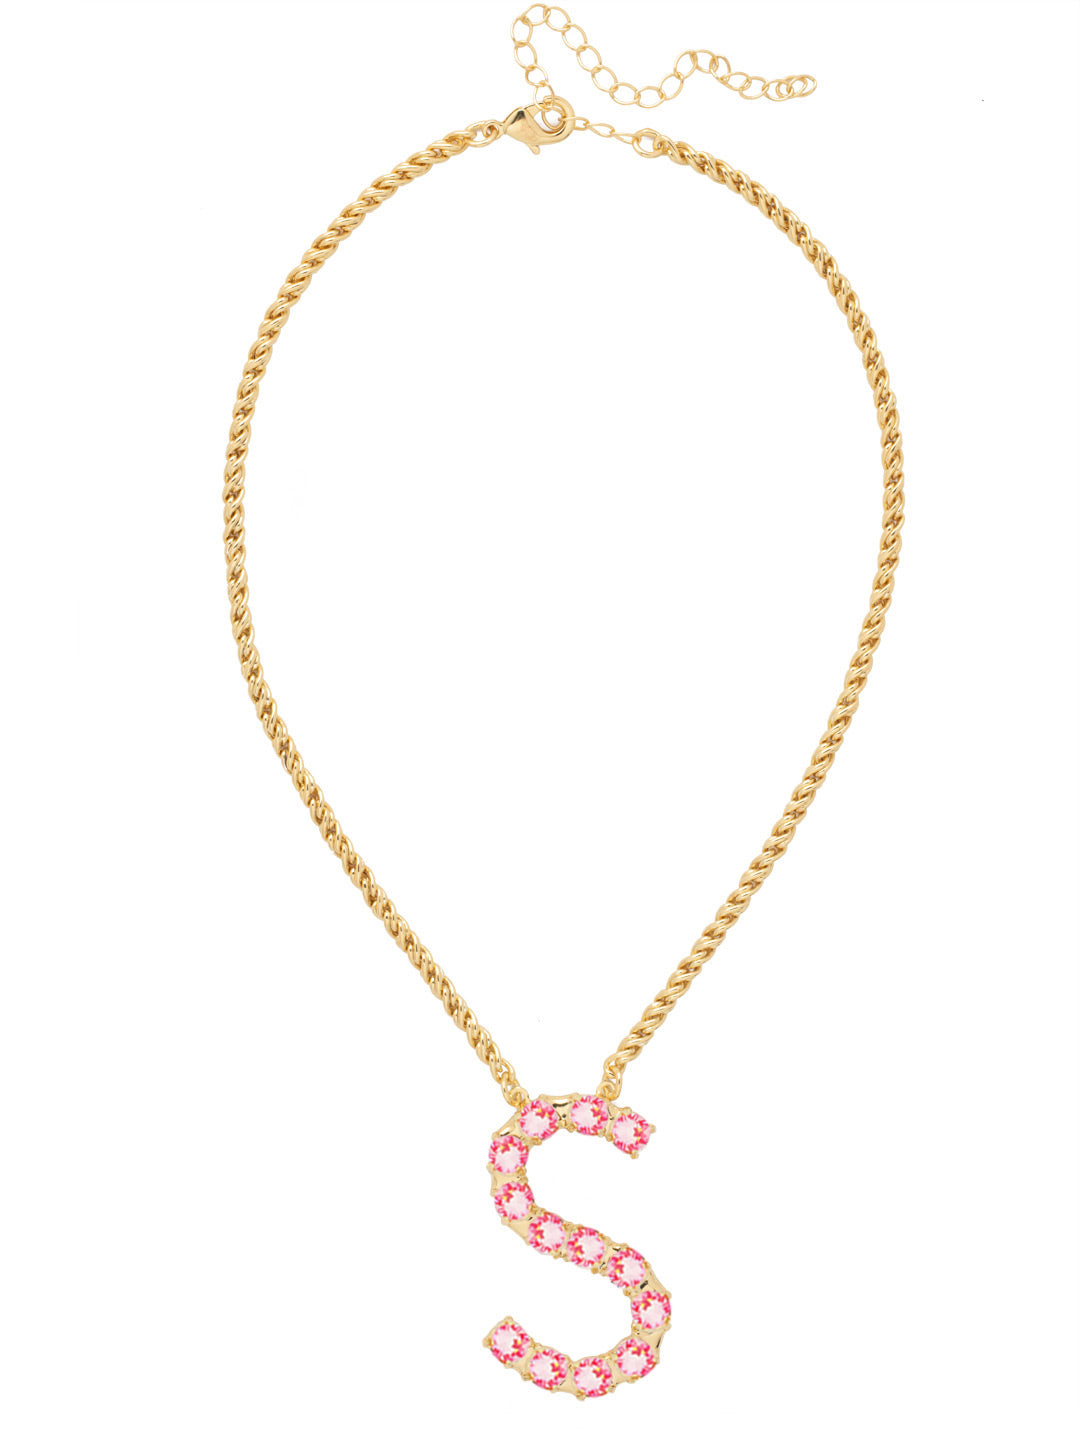 S Initial Rope Pendant Necklace - NFK38BGETP - <p>The Initial Rope Pendant Necklace features a crystal encrusted metal monogram pendant on an adjustable rope chain, secured with a lobster claw clasp. From Sorrelli's Electric Pink collection in our Bright Gold-tone finish.</p>